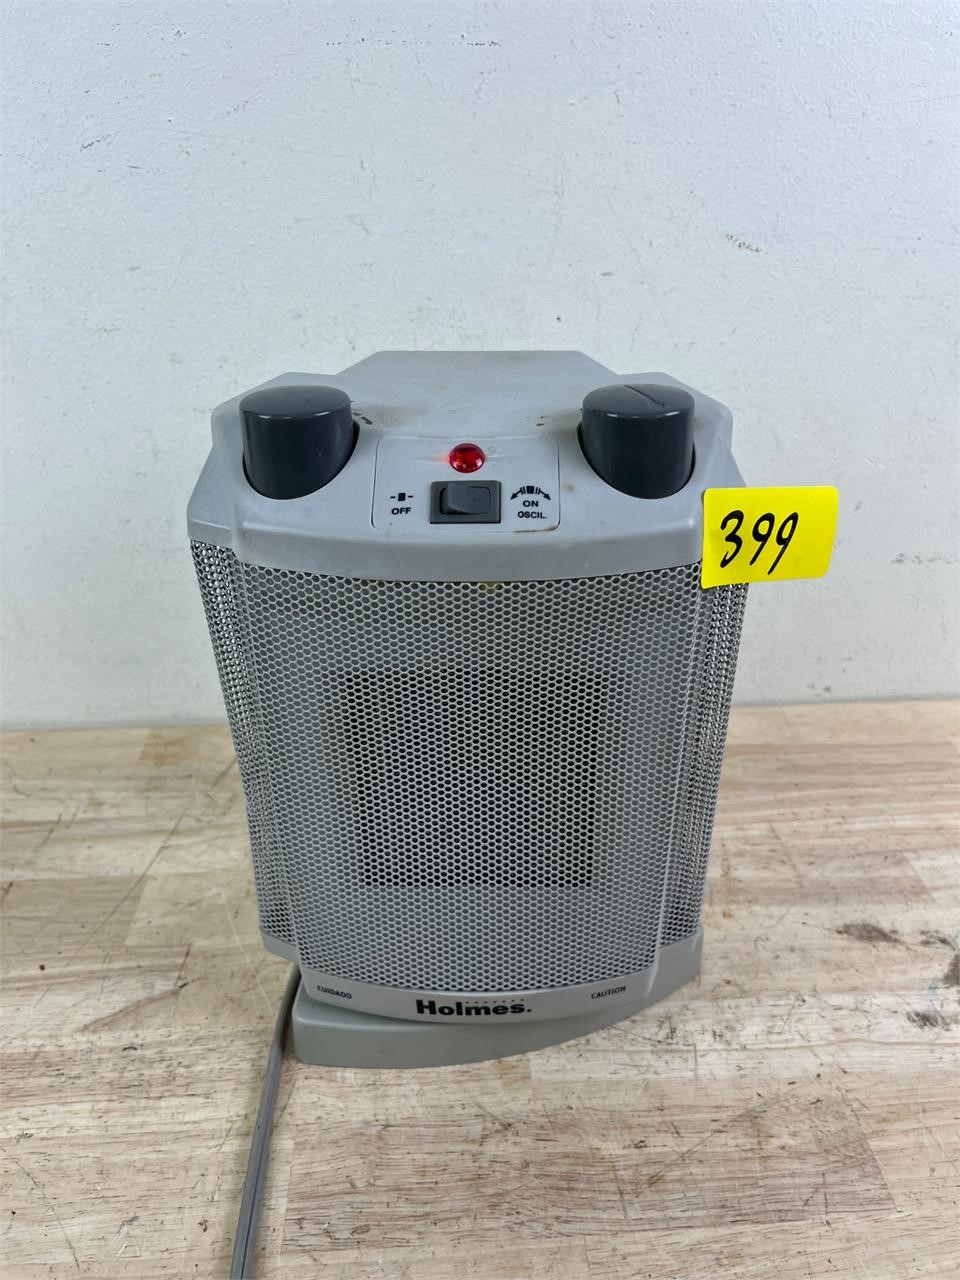 Holmes electric heater tested